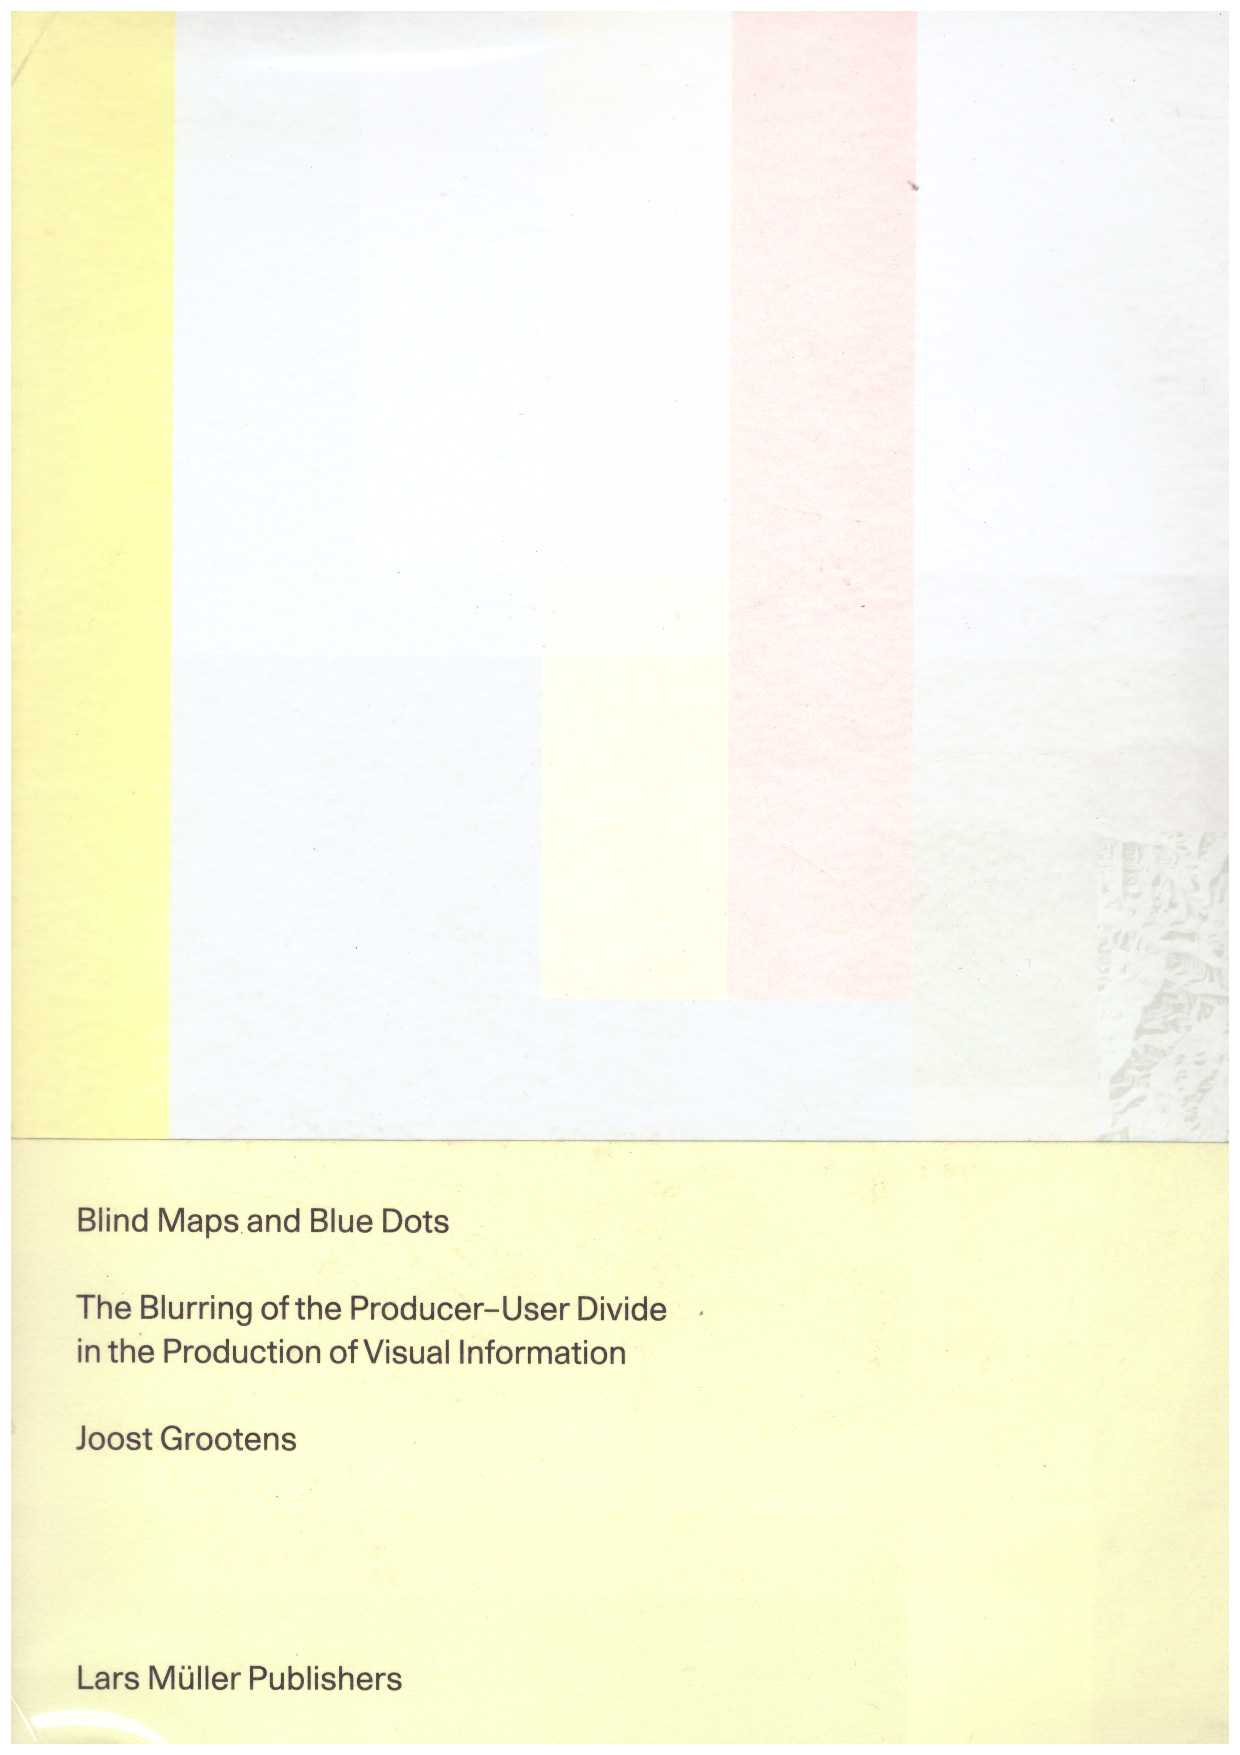 GROOTENS, Joost   - Blind Maps and Blue Dots. The Blurring of the Producer-User Divide in the Production of Visual Information